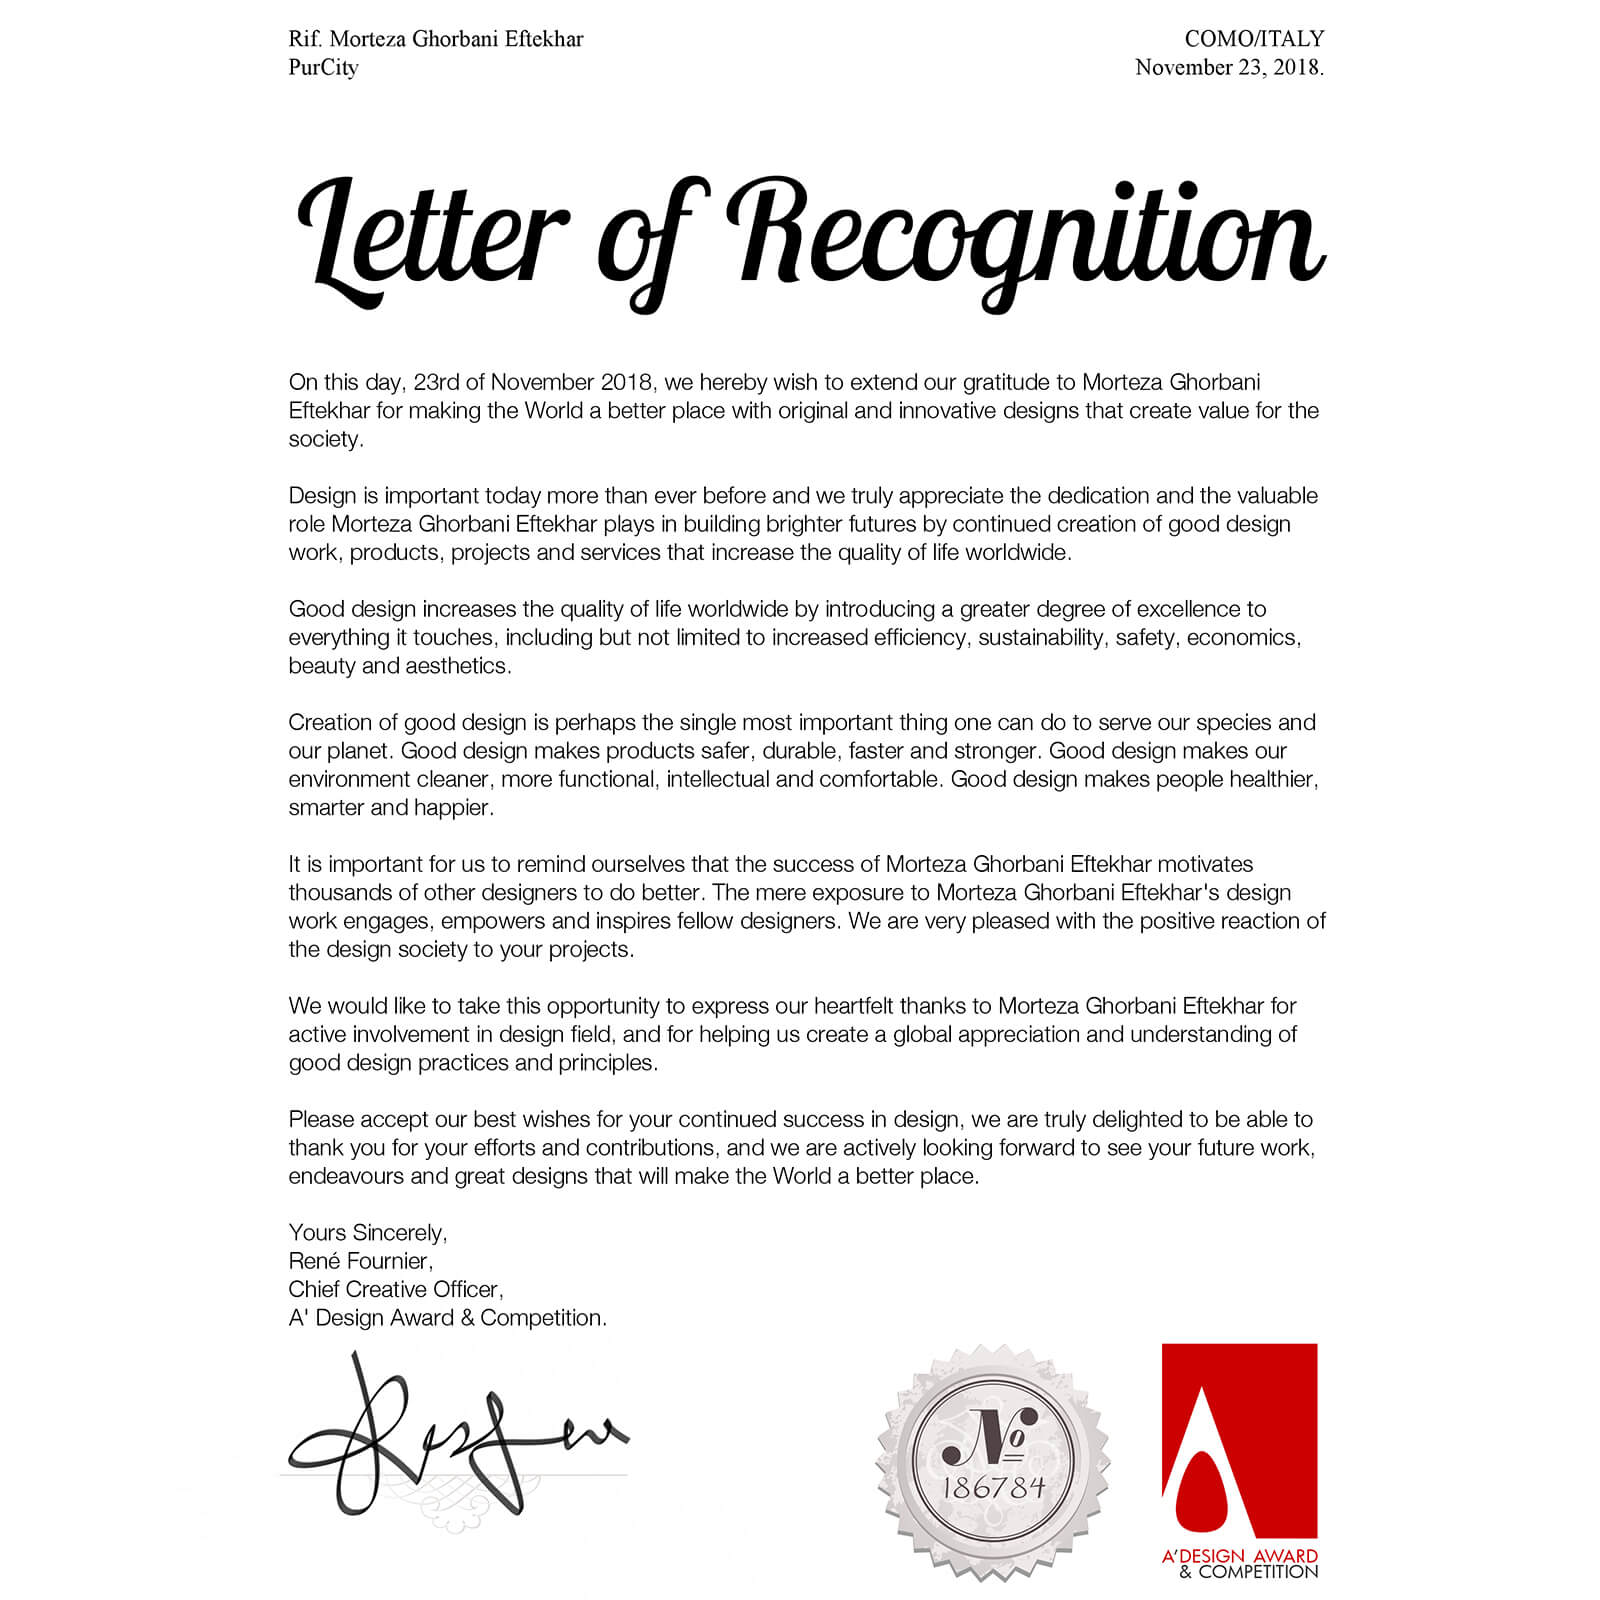 Letter of recognition by A'Design Award